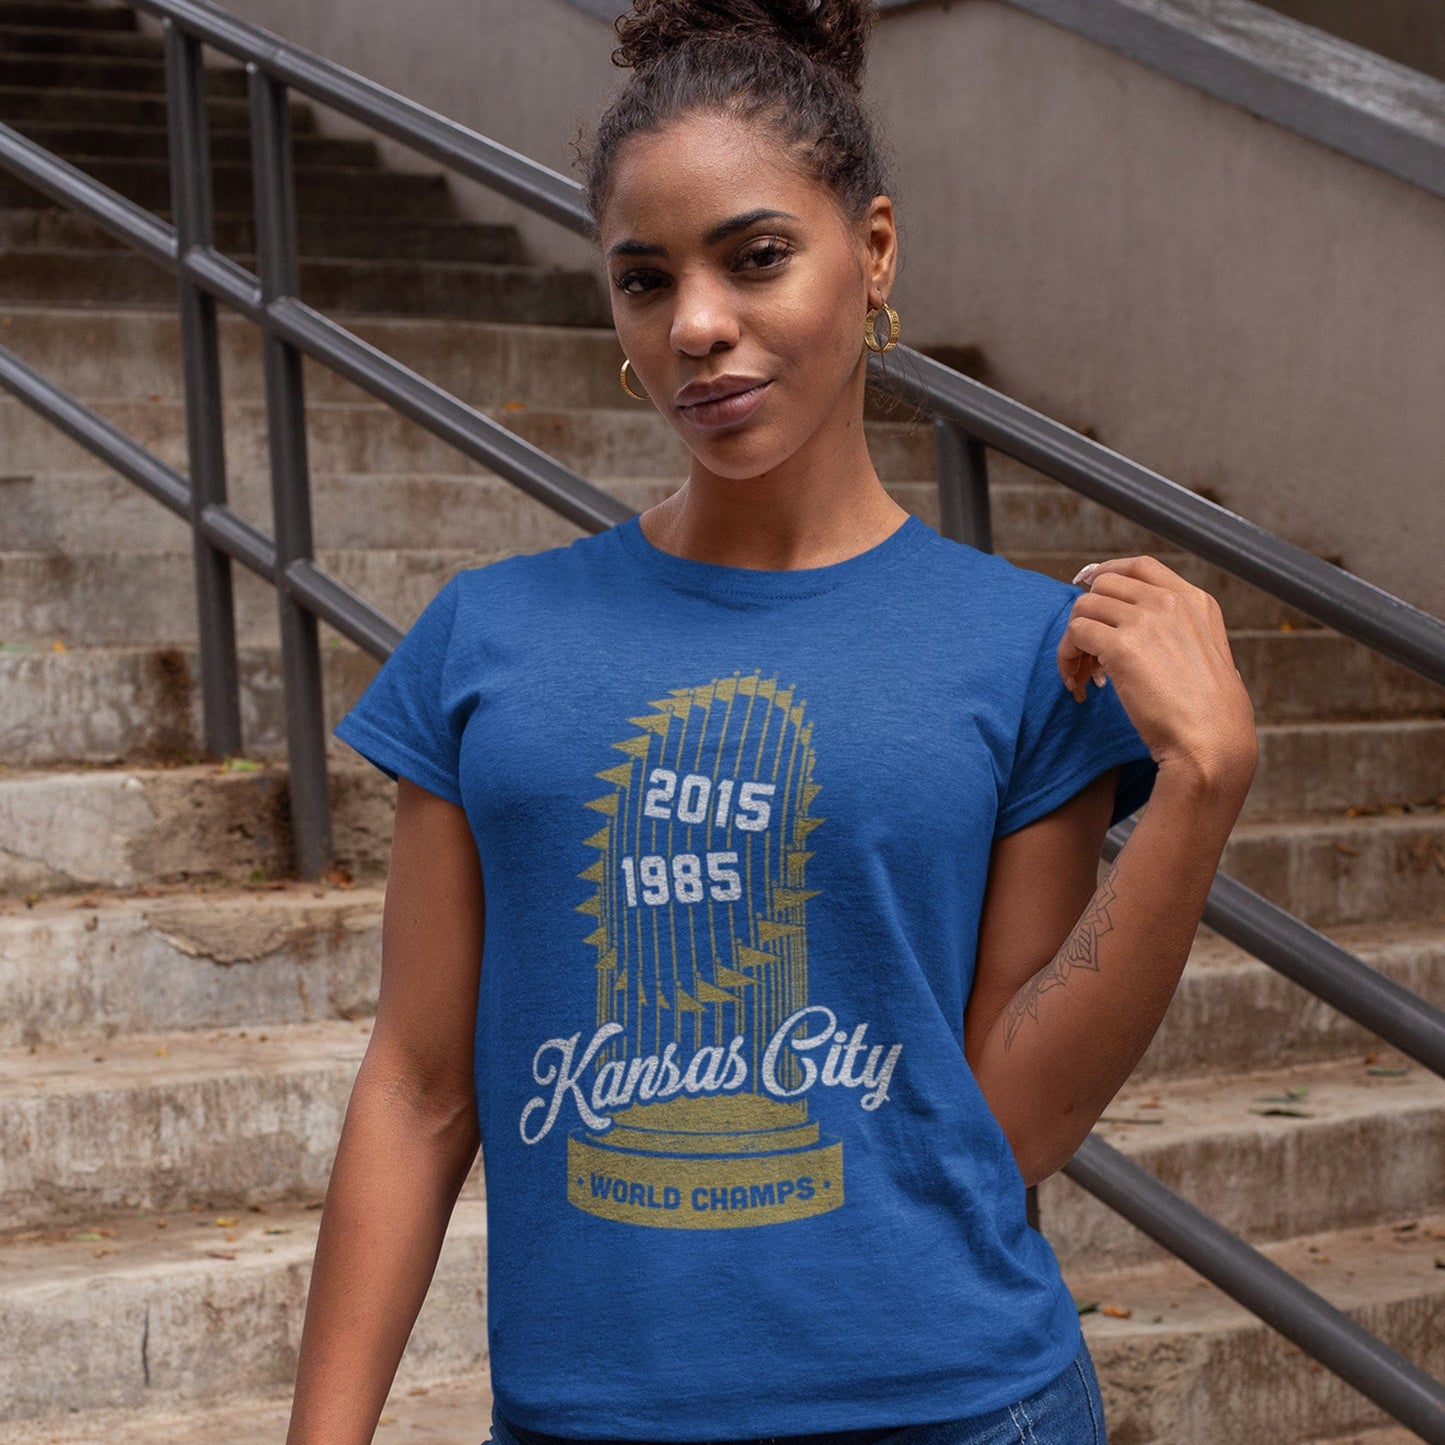 KC Swag Kansas City Royals white KANSAS CITY 2015 1985 with gold WORLD SERIES TROPHY on heather royal blue t-shirt worn by female model standing on concrete staircase